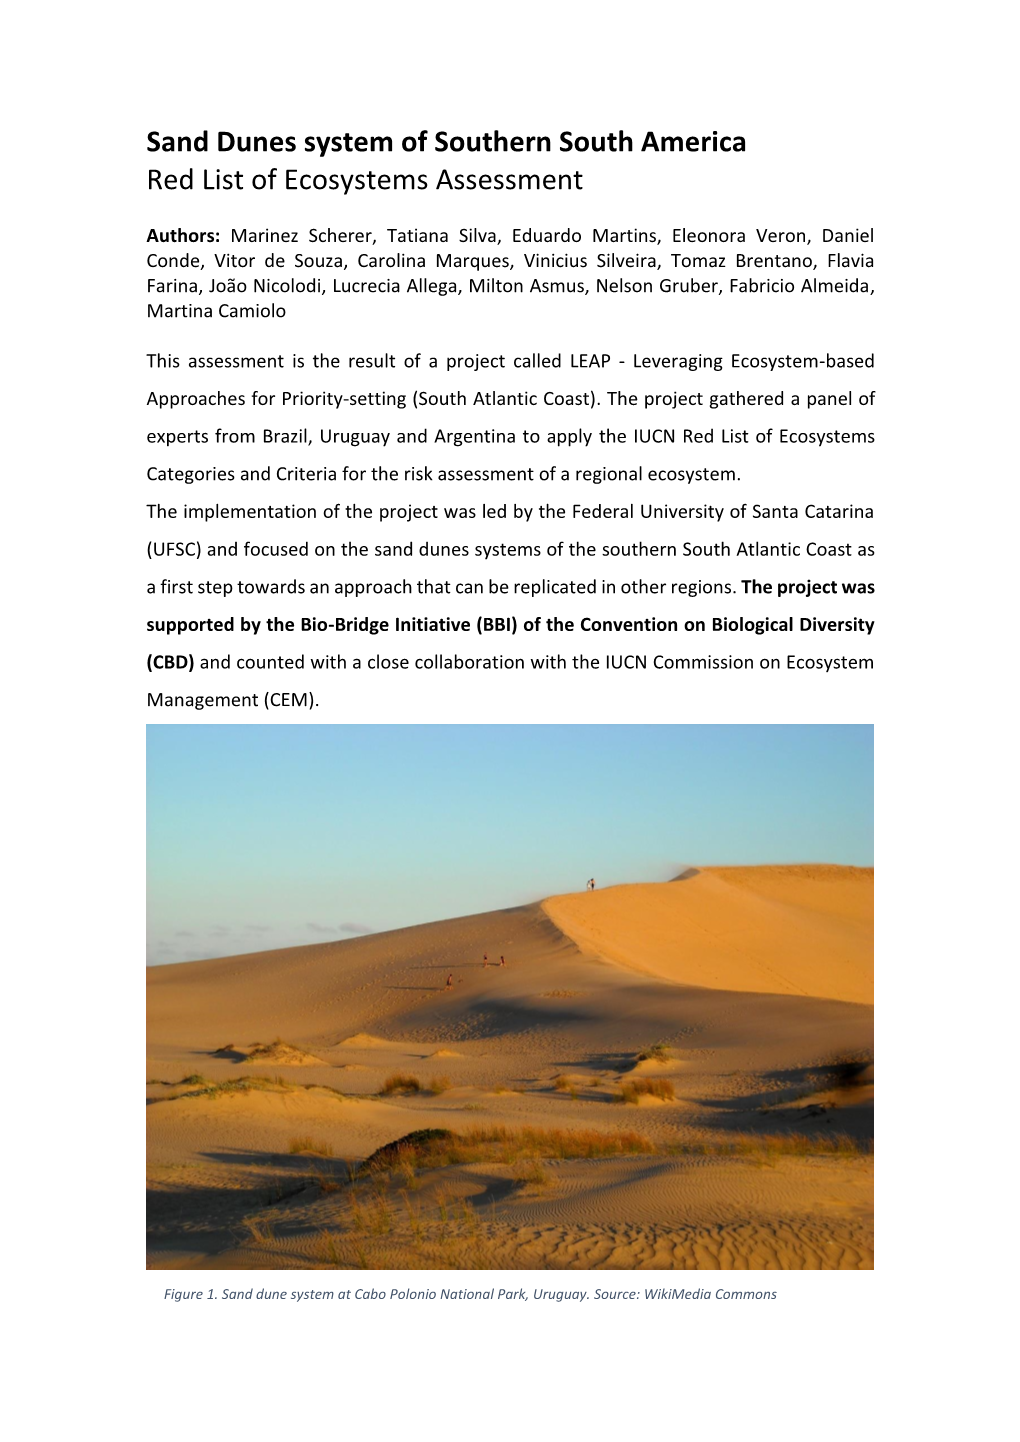 Sand Dunes System of Southern South America Red List of Ecosystems Assessment